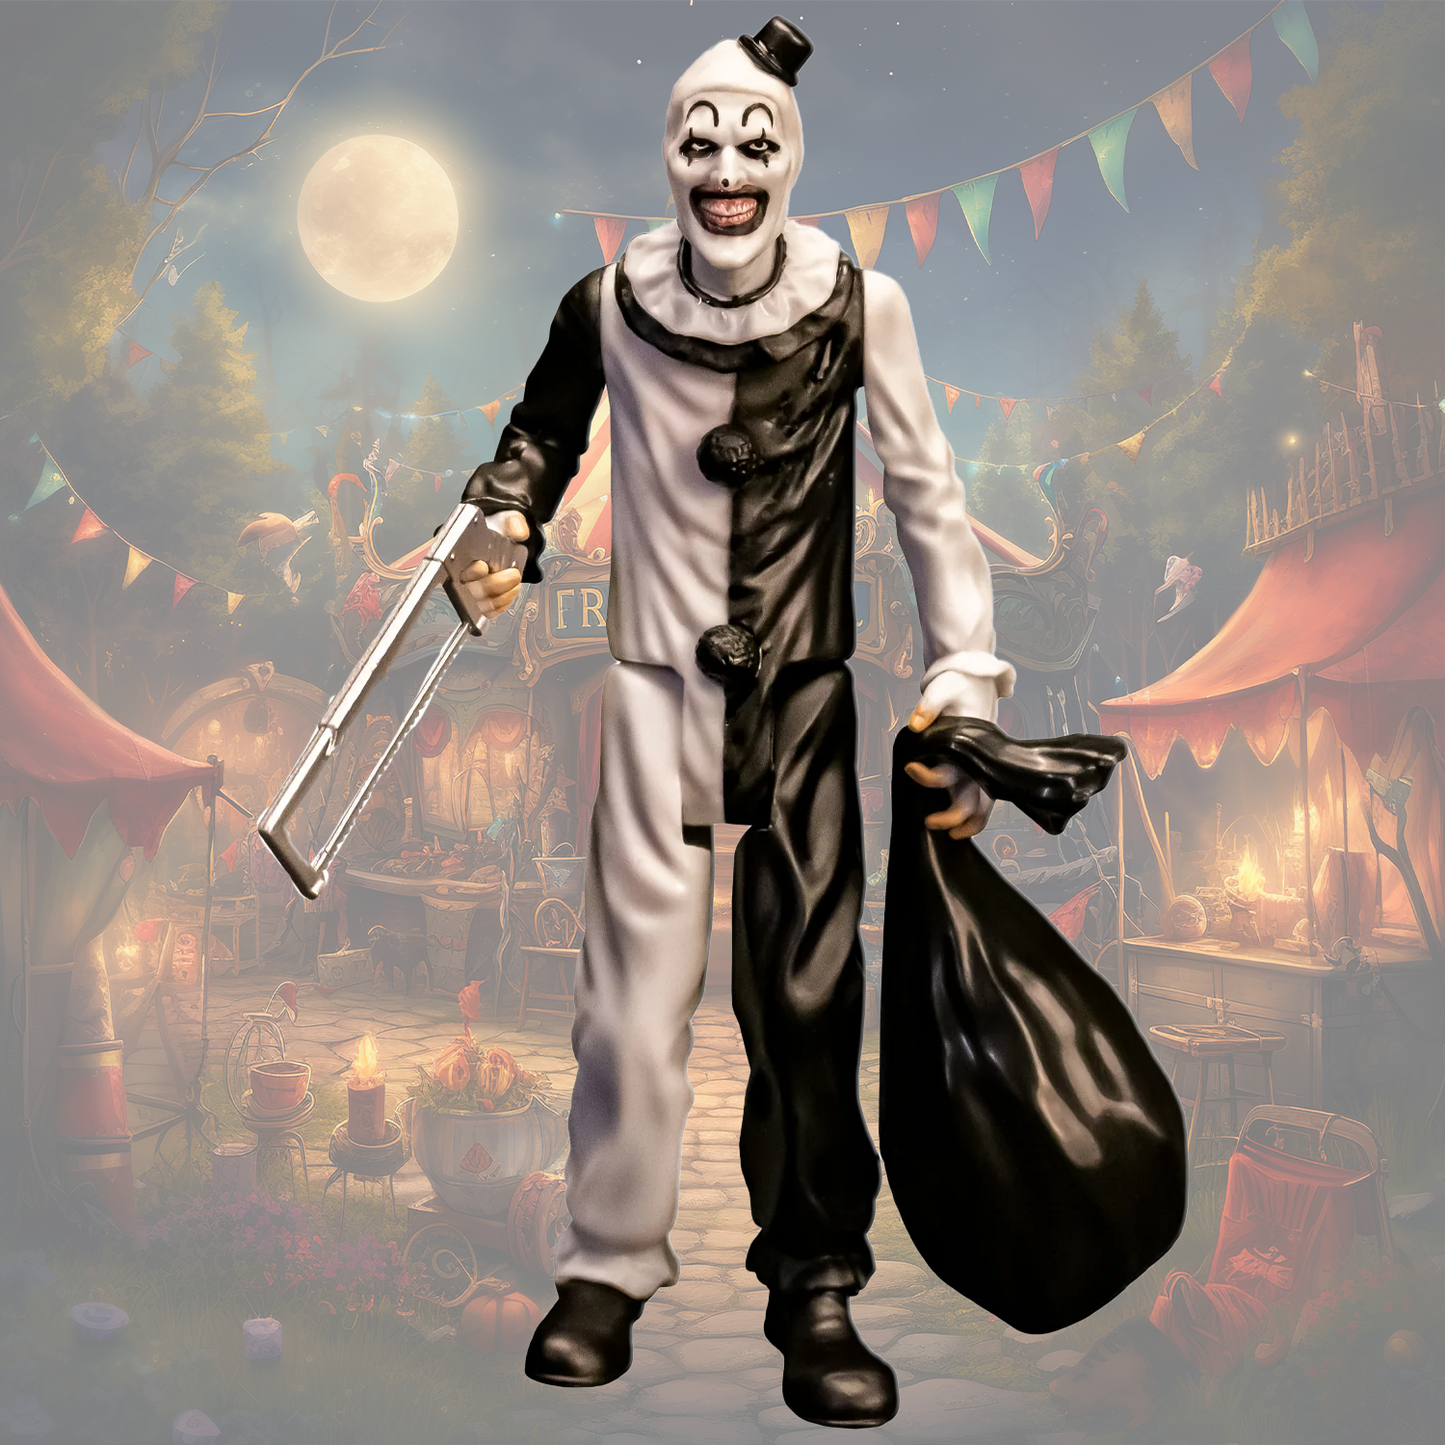 Get Terrified Over And Over With This Terrifier Art The Clown Bloodbath 5" Collectible